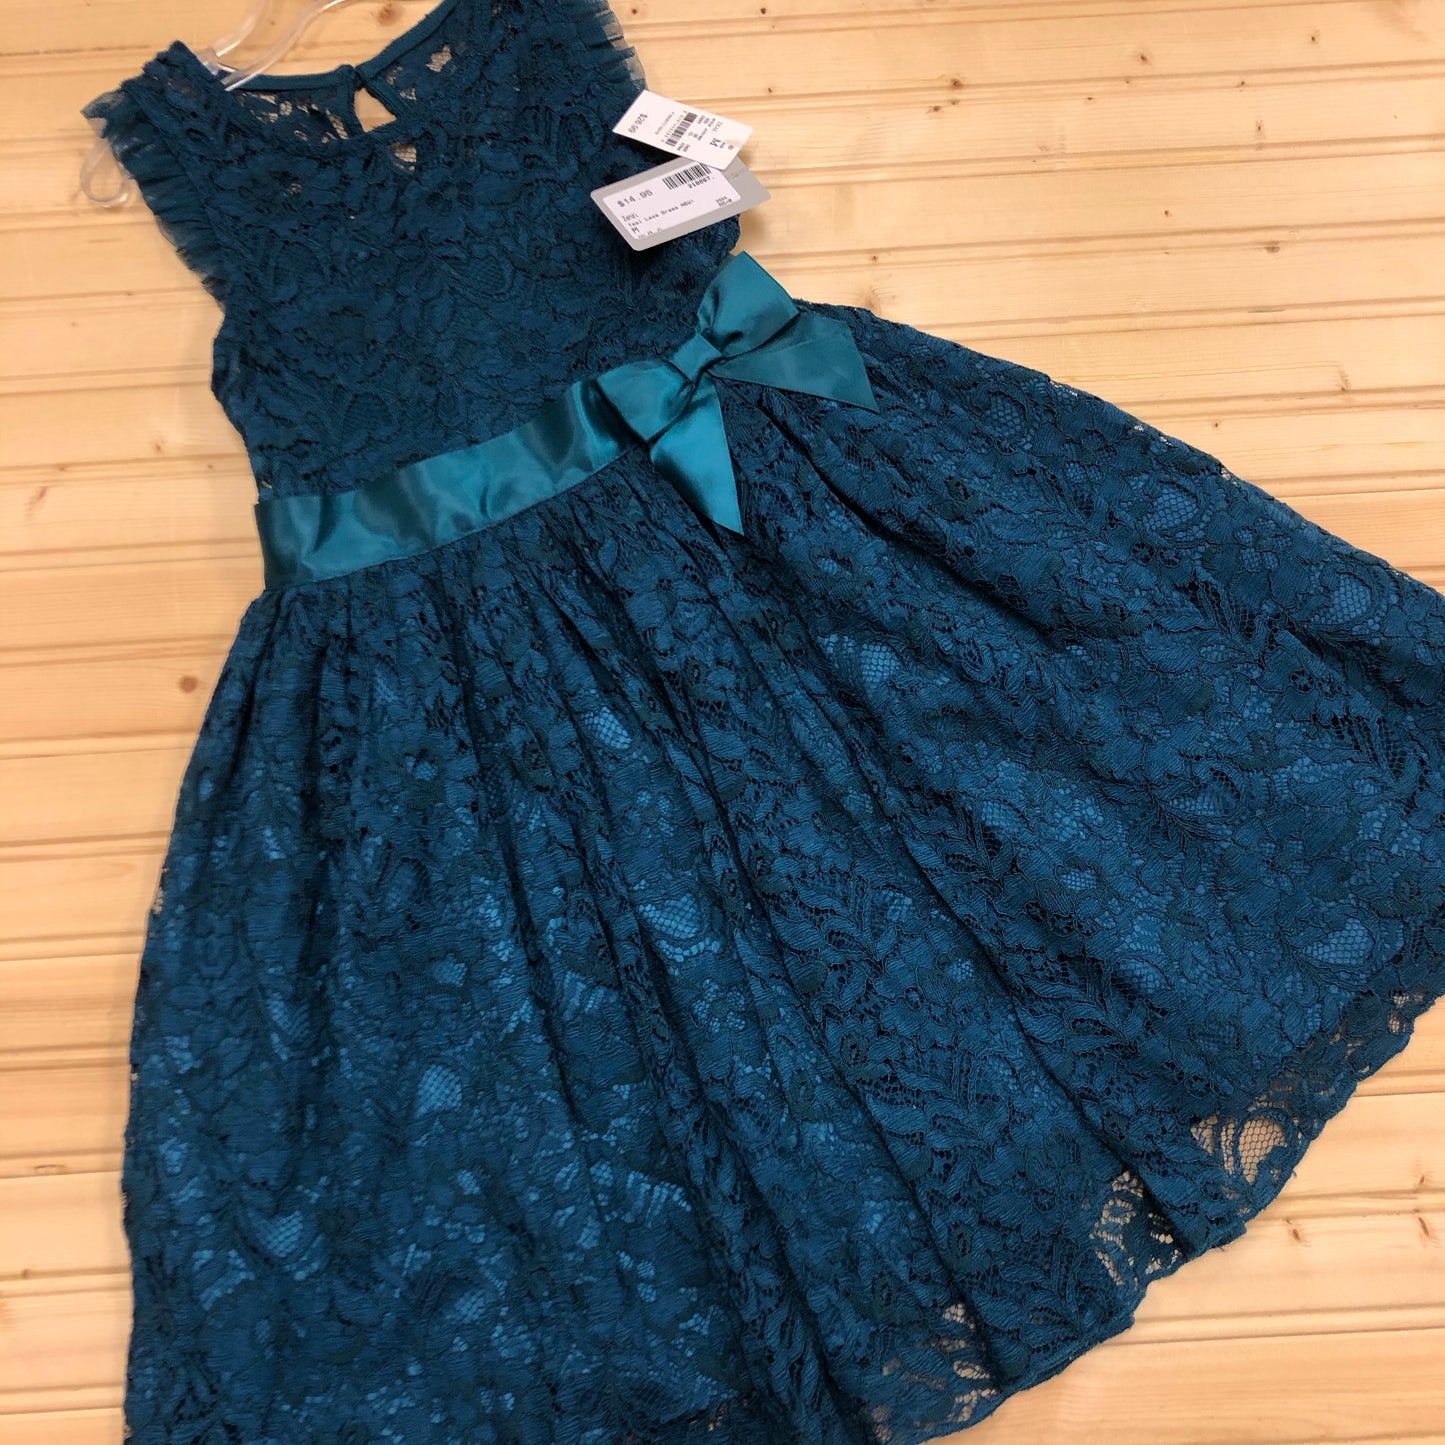 Teal Lace Dress NEW!